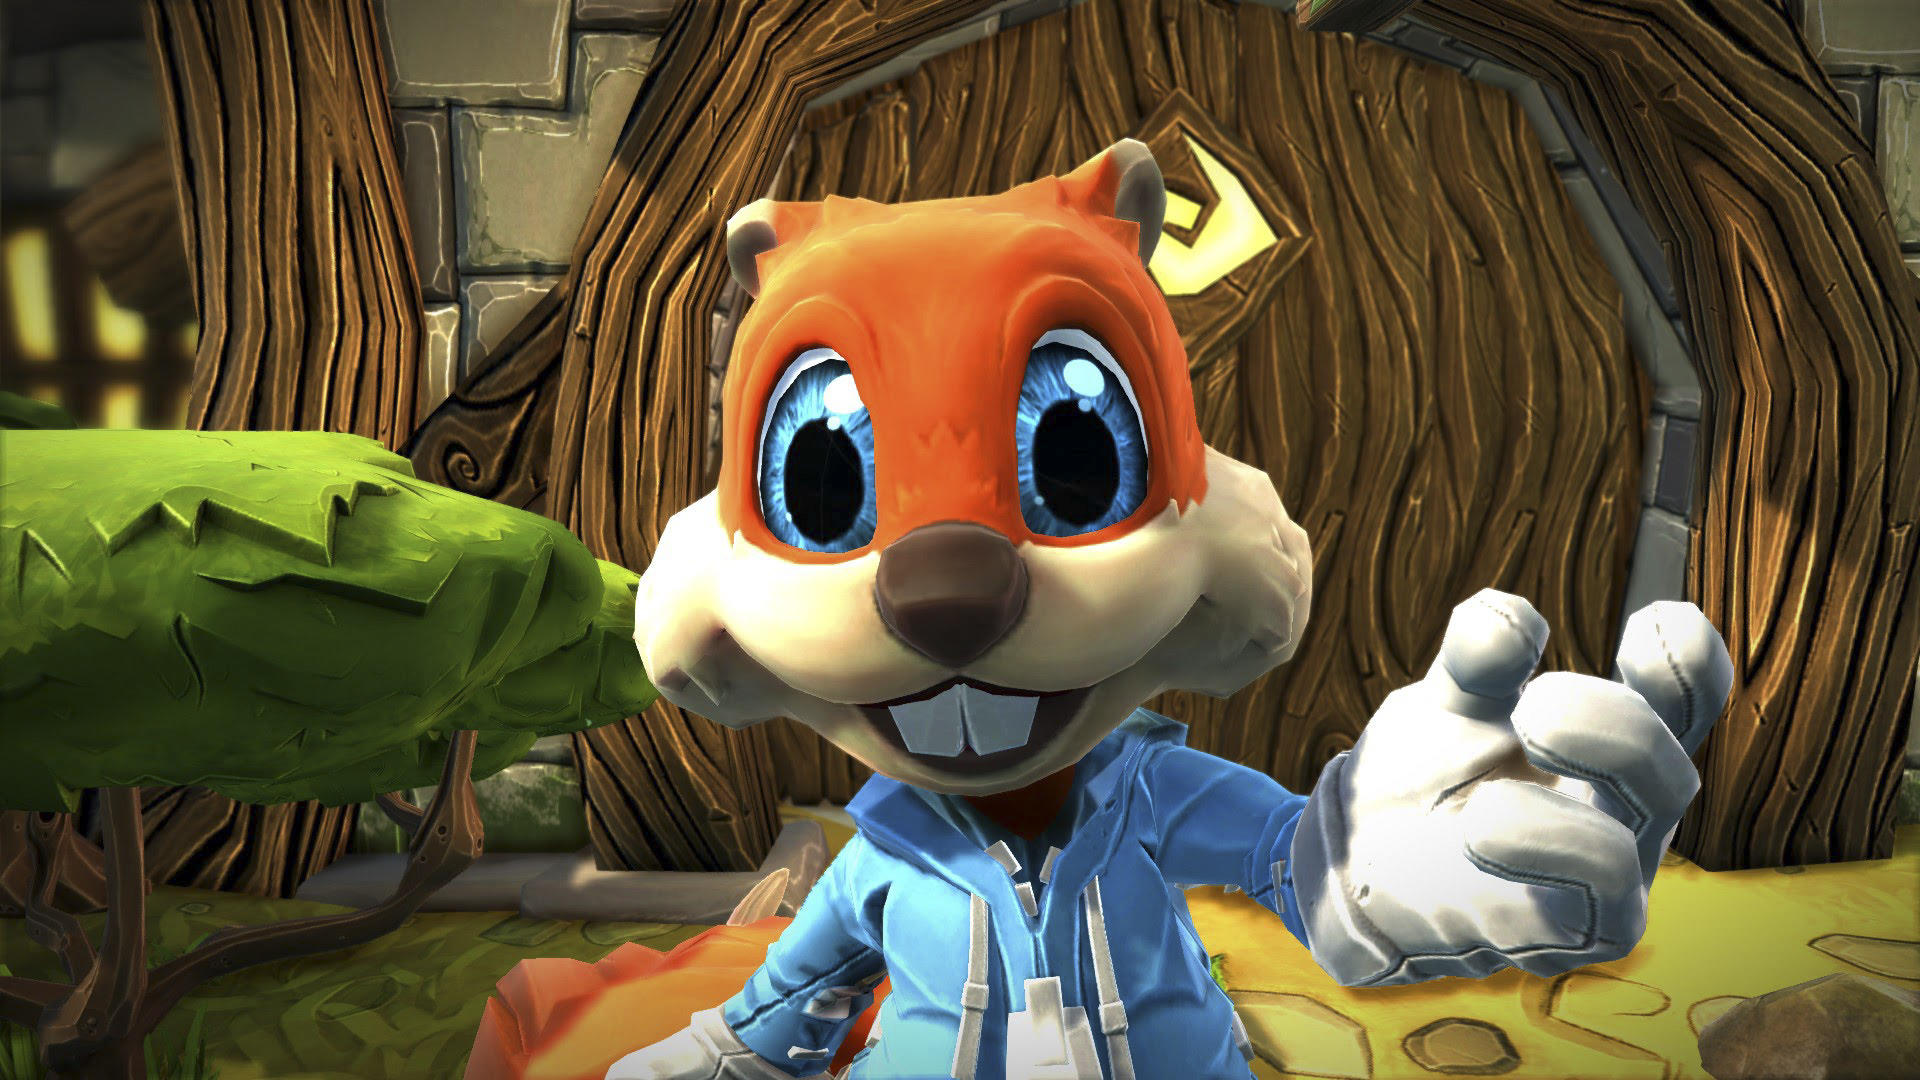 A still fromConker's Bad Fur Day.